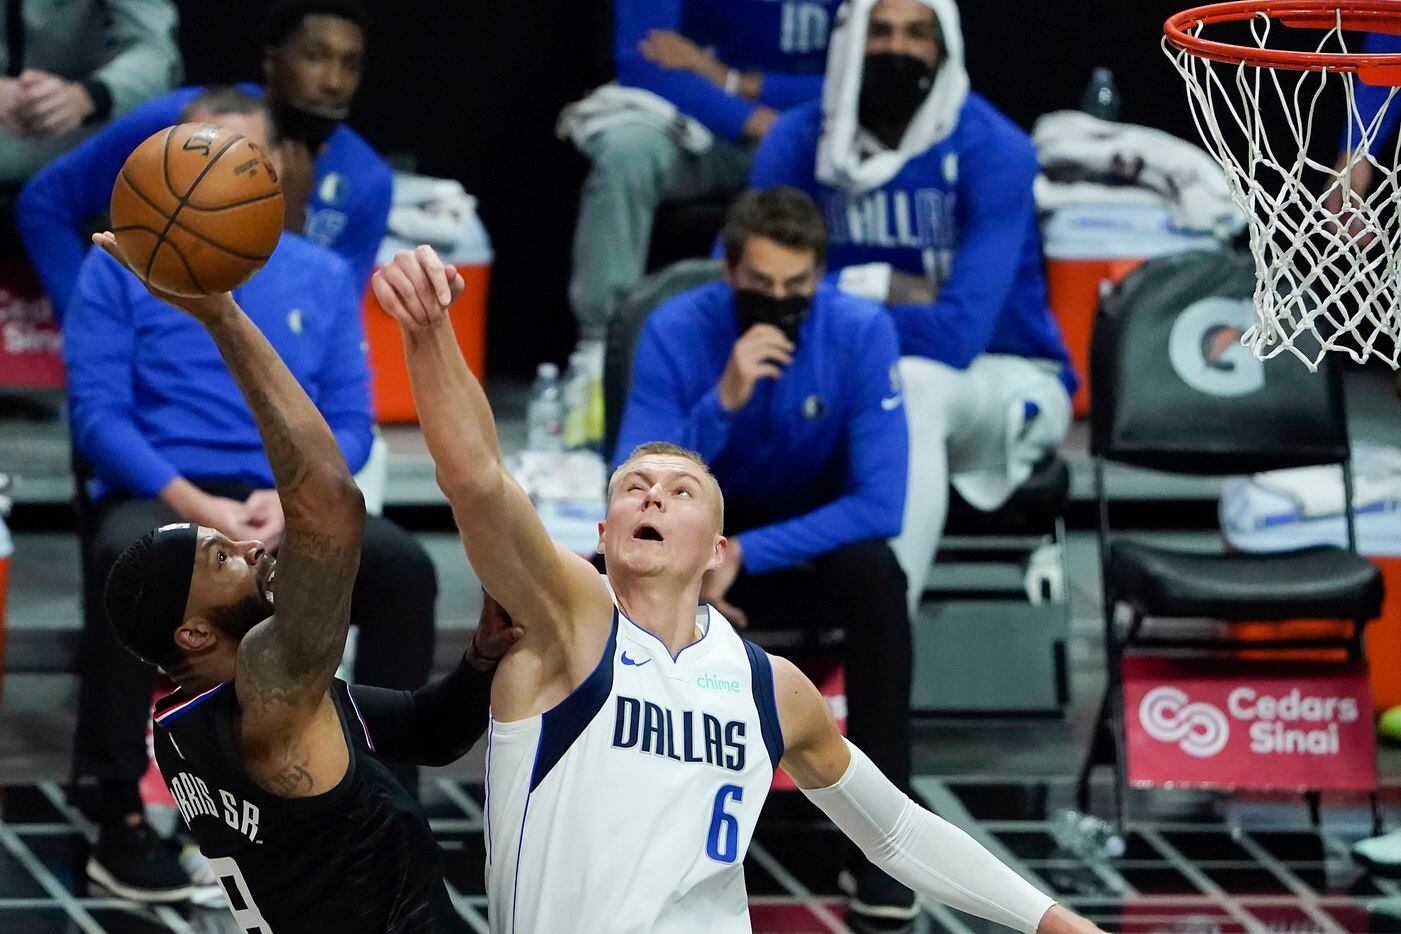 Dallas Mavericks center Kristaps Porzingis (6) blocks a shot by LA Clippers forward Marcus Morris Sr. (8) during the second half of an NBA playoff basketball game at Staples Center on Tuesday, May 25, 2021, in Los Angeles.